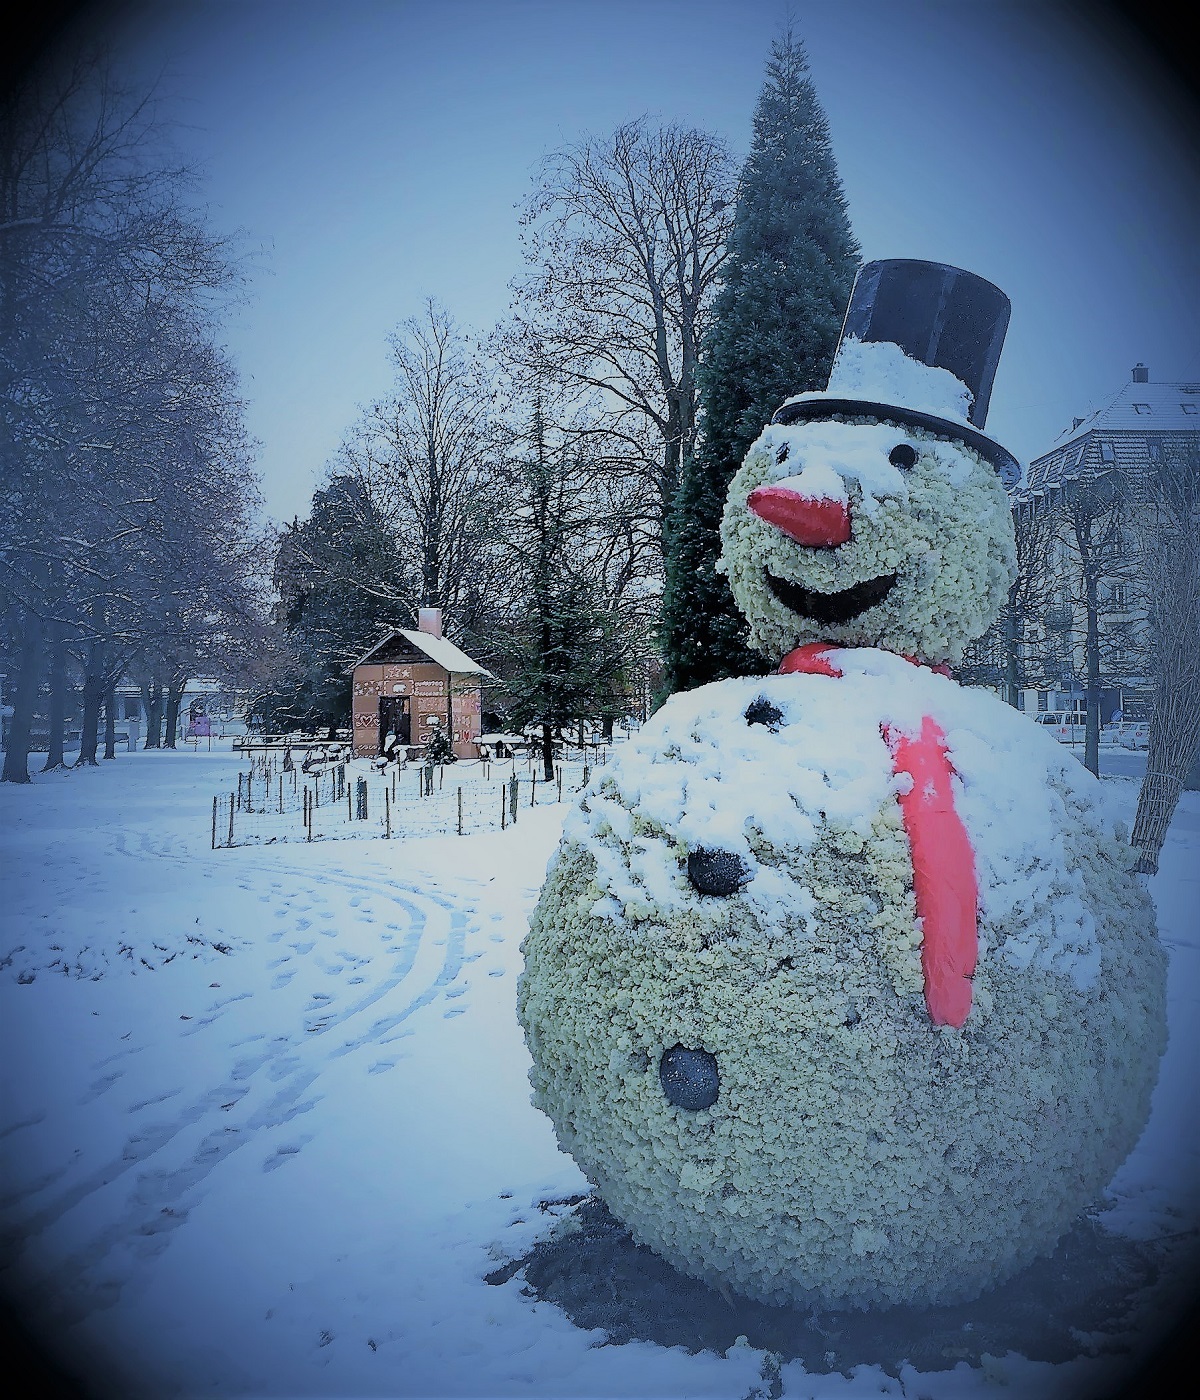 The snowman wishes everyone Merry Christmas and a Happy New Year.